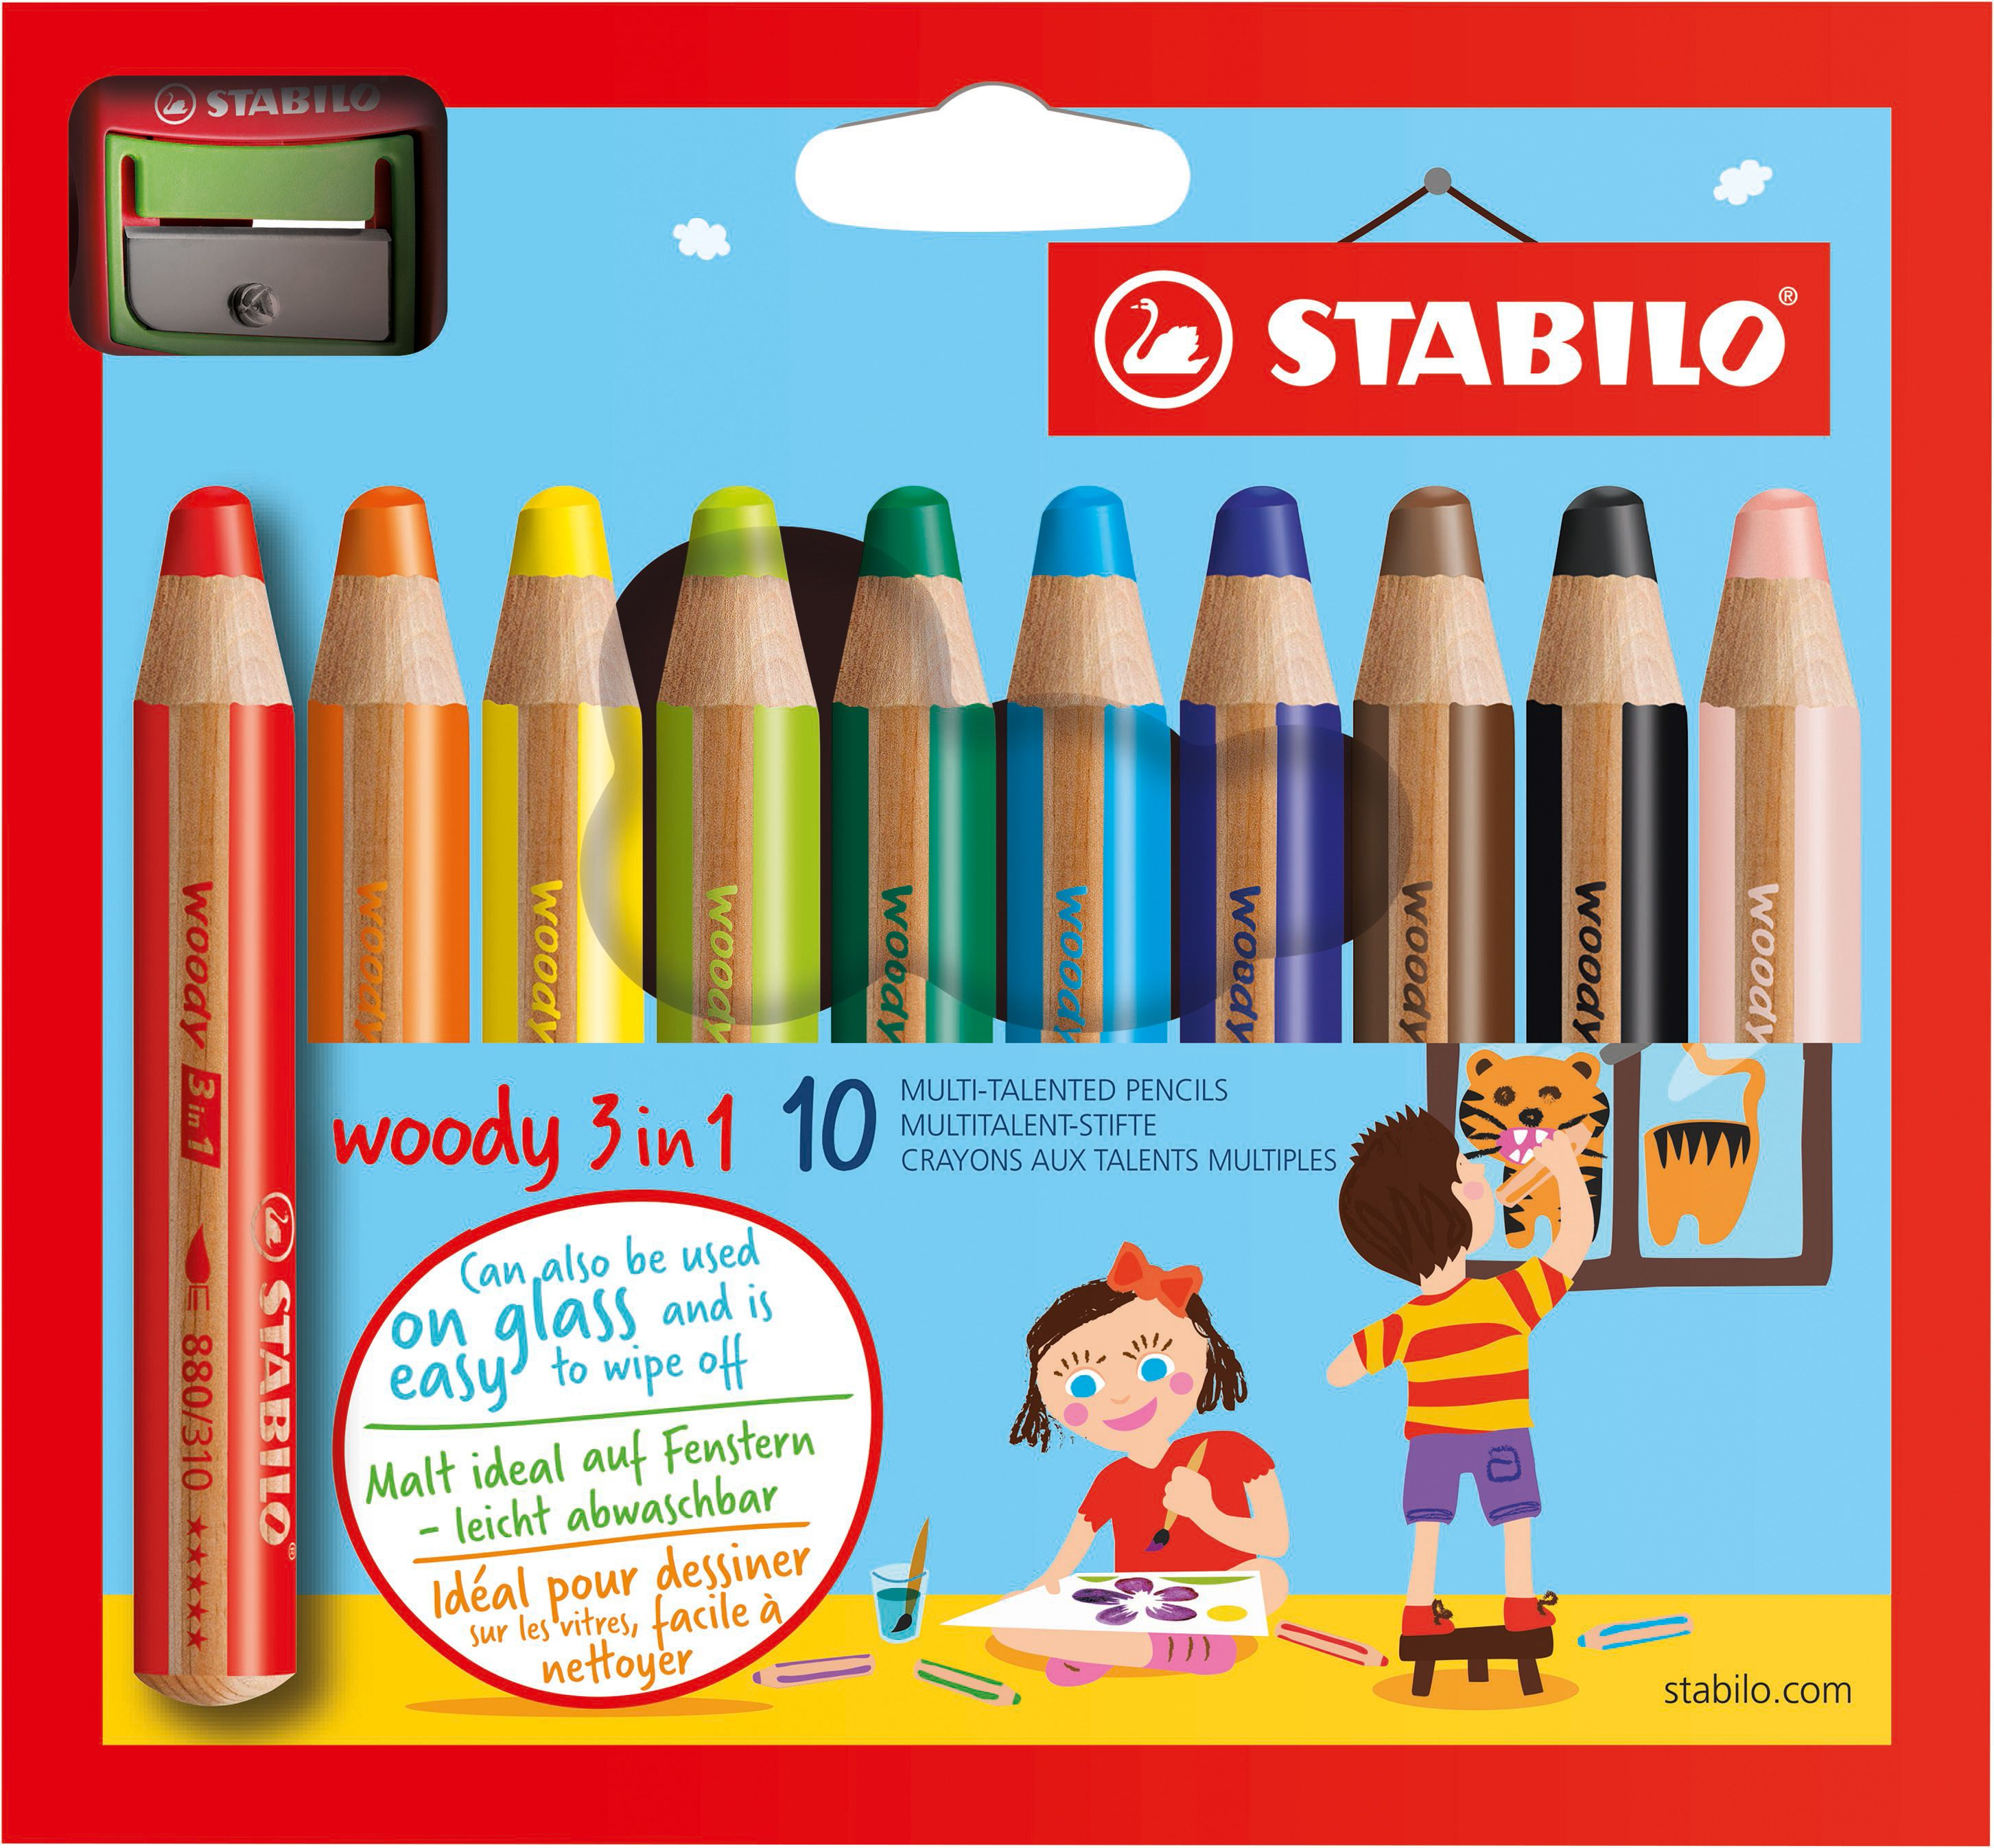 OPITEC - LOISIRS SCIENCES CREATIVITE  Crayons tout-terrain STABILO woody  3in1, 18 pièces